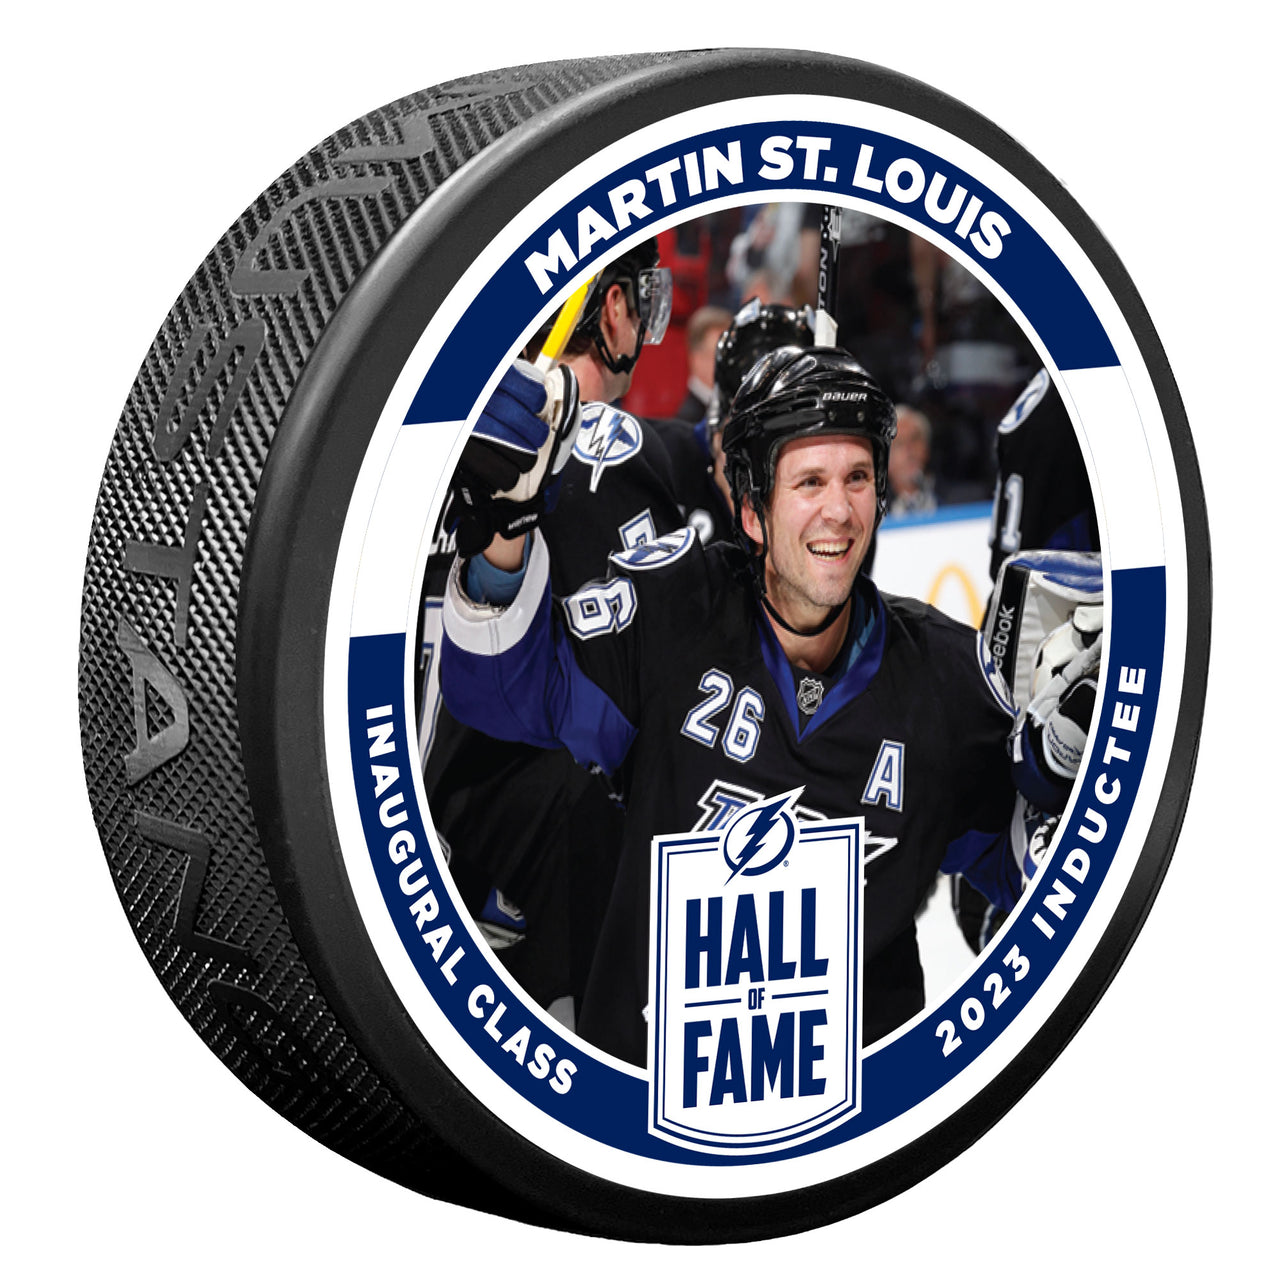 Martin St. Louis Lightning Hall of Fame Limited Edition 3D Embossed Puck